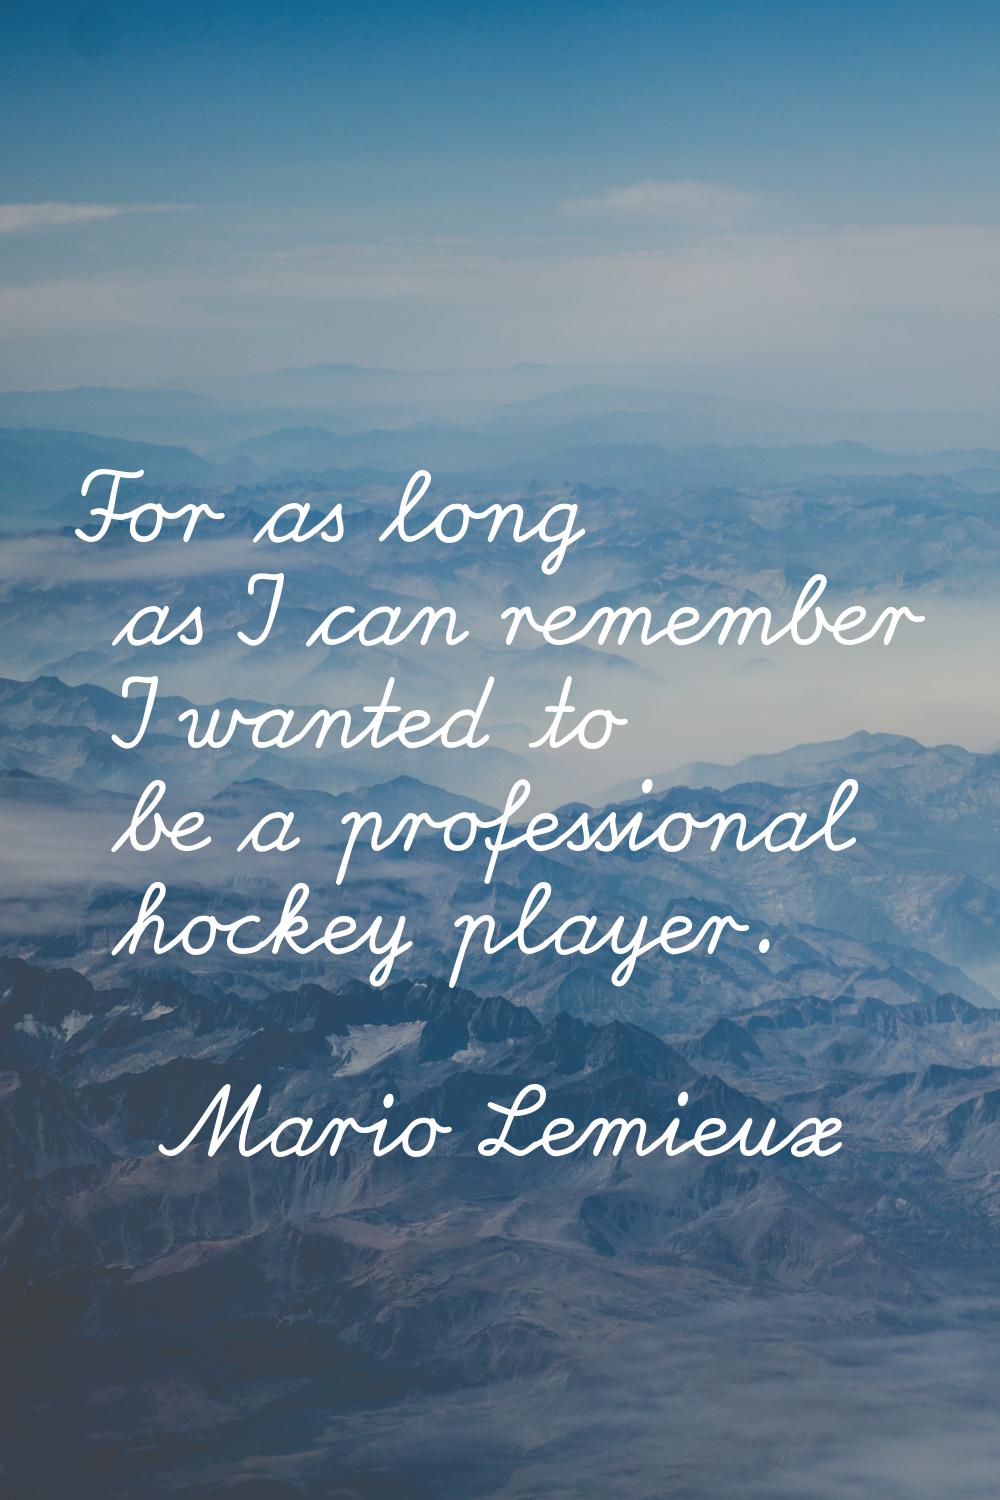 For as long as I can remember I wanted to be a professional hockey player.